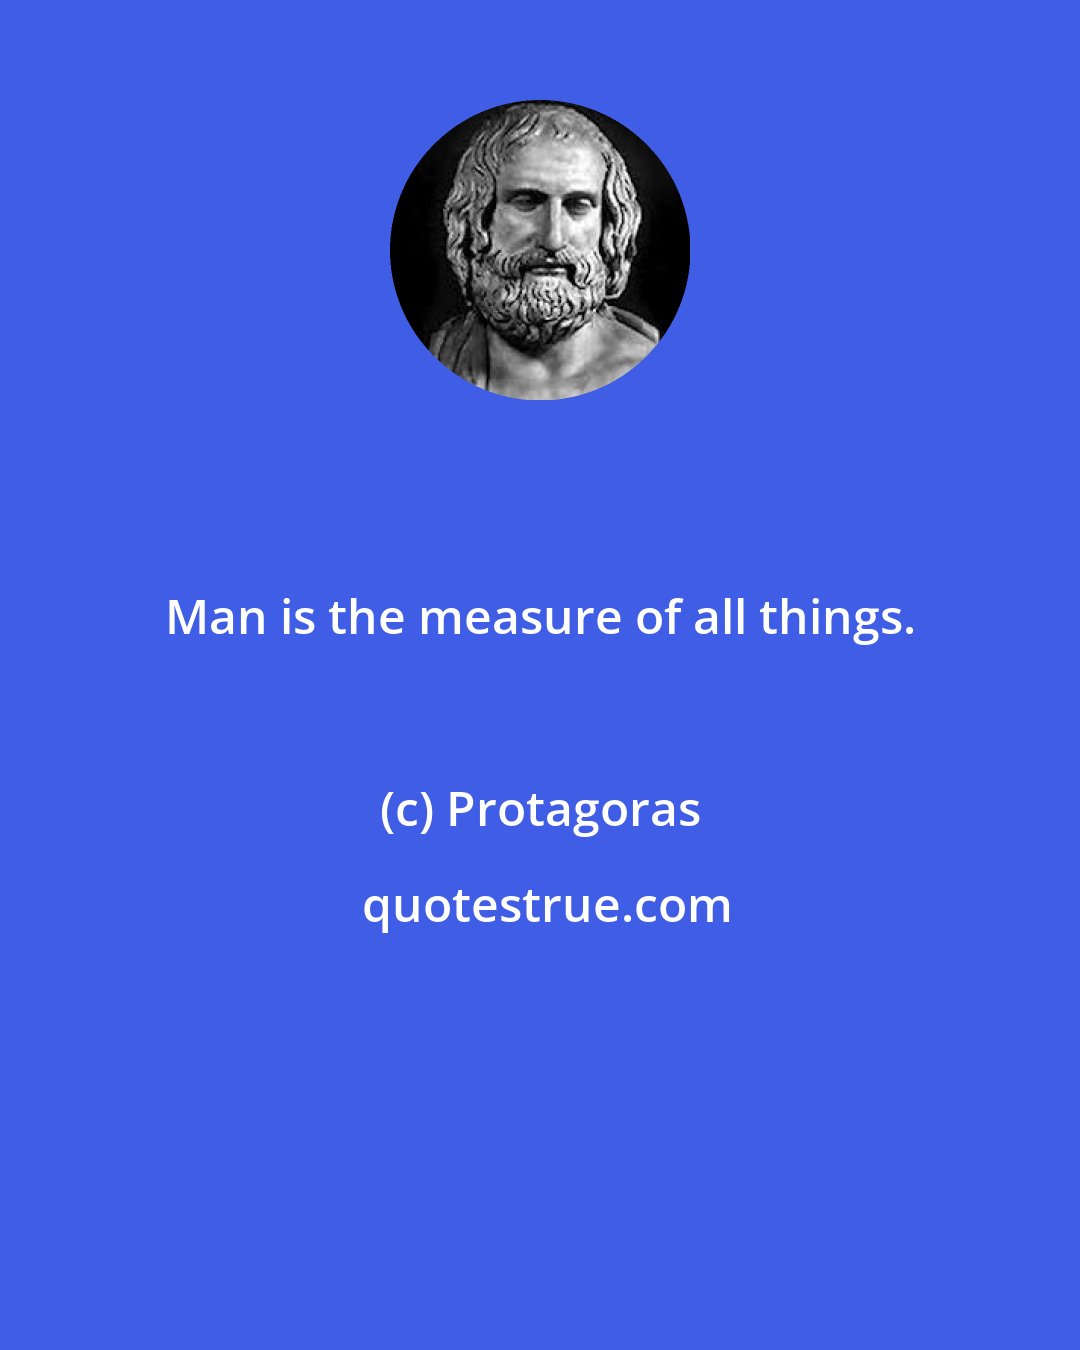 Protagoras: Man is the measure of all things.